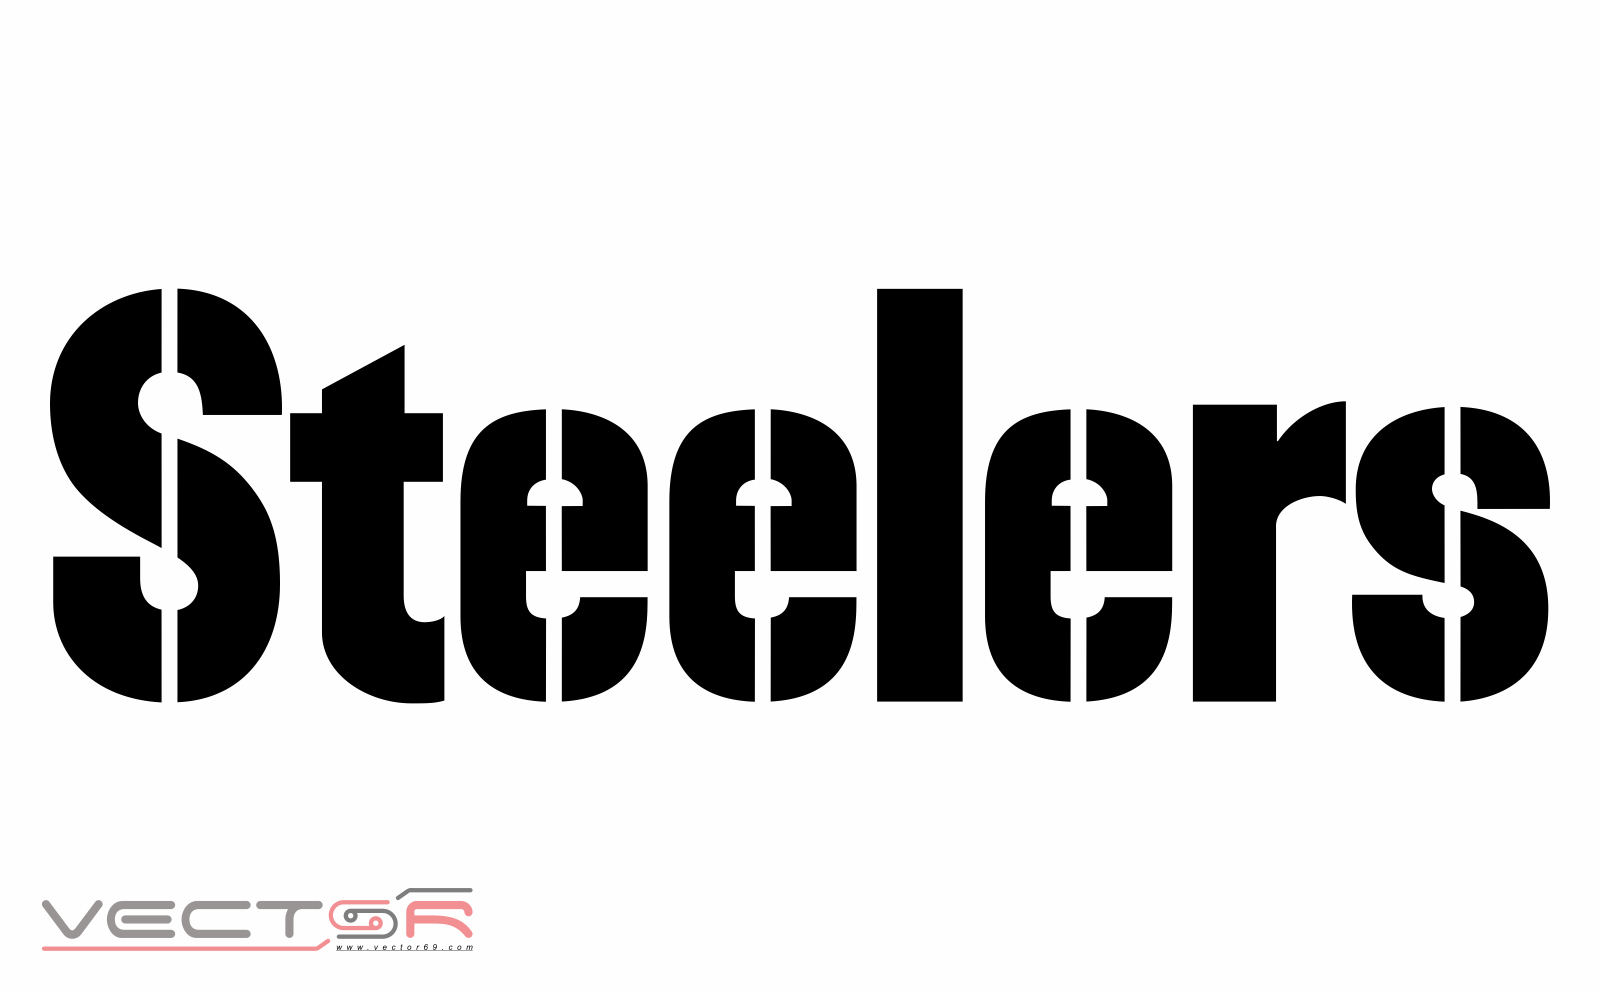 Pittsburgh Steelers Wordmark - Download Transparent Images, Portable Network Graphics (.PNG)